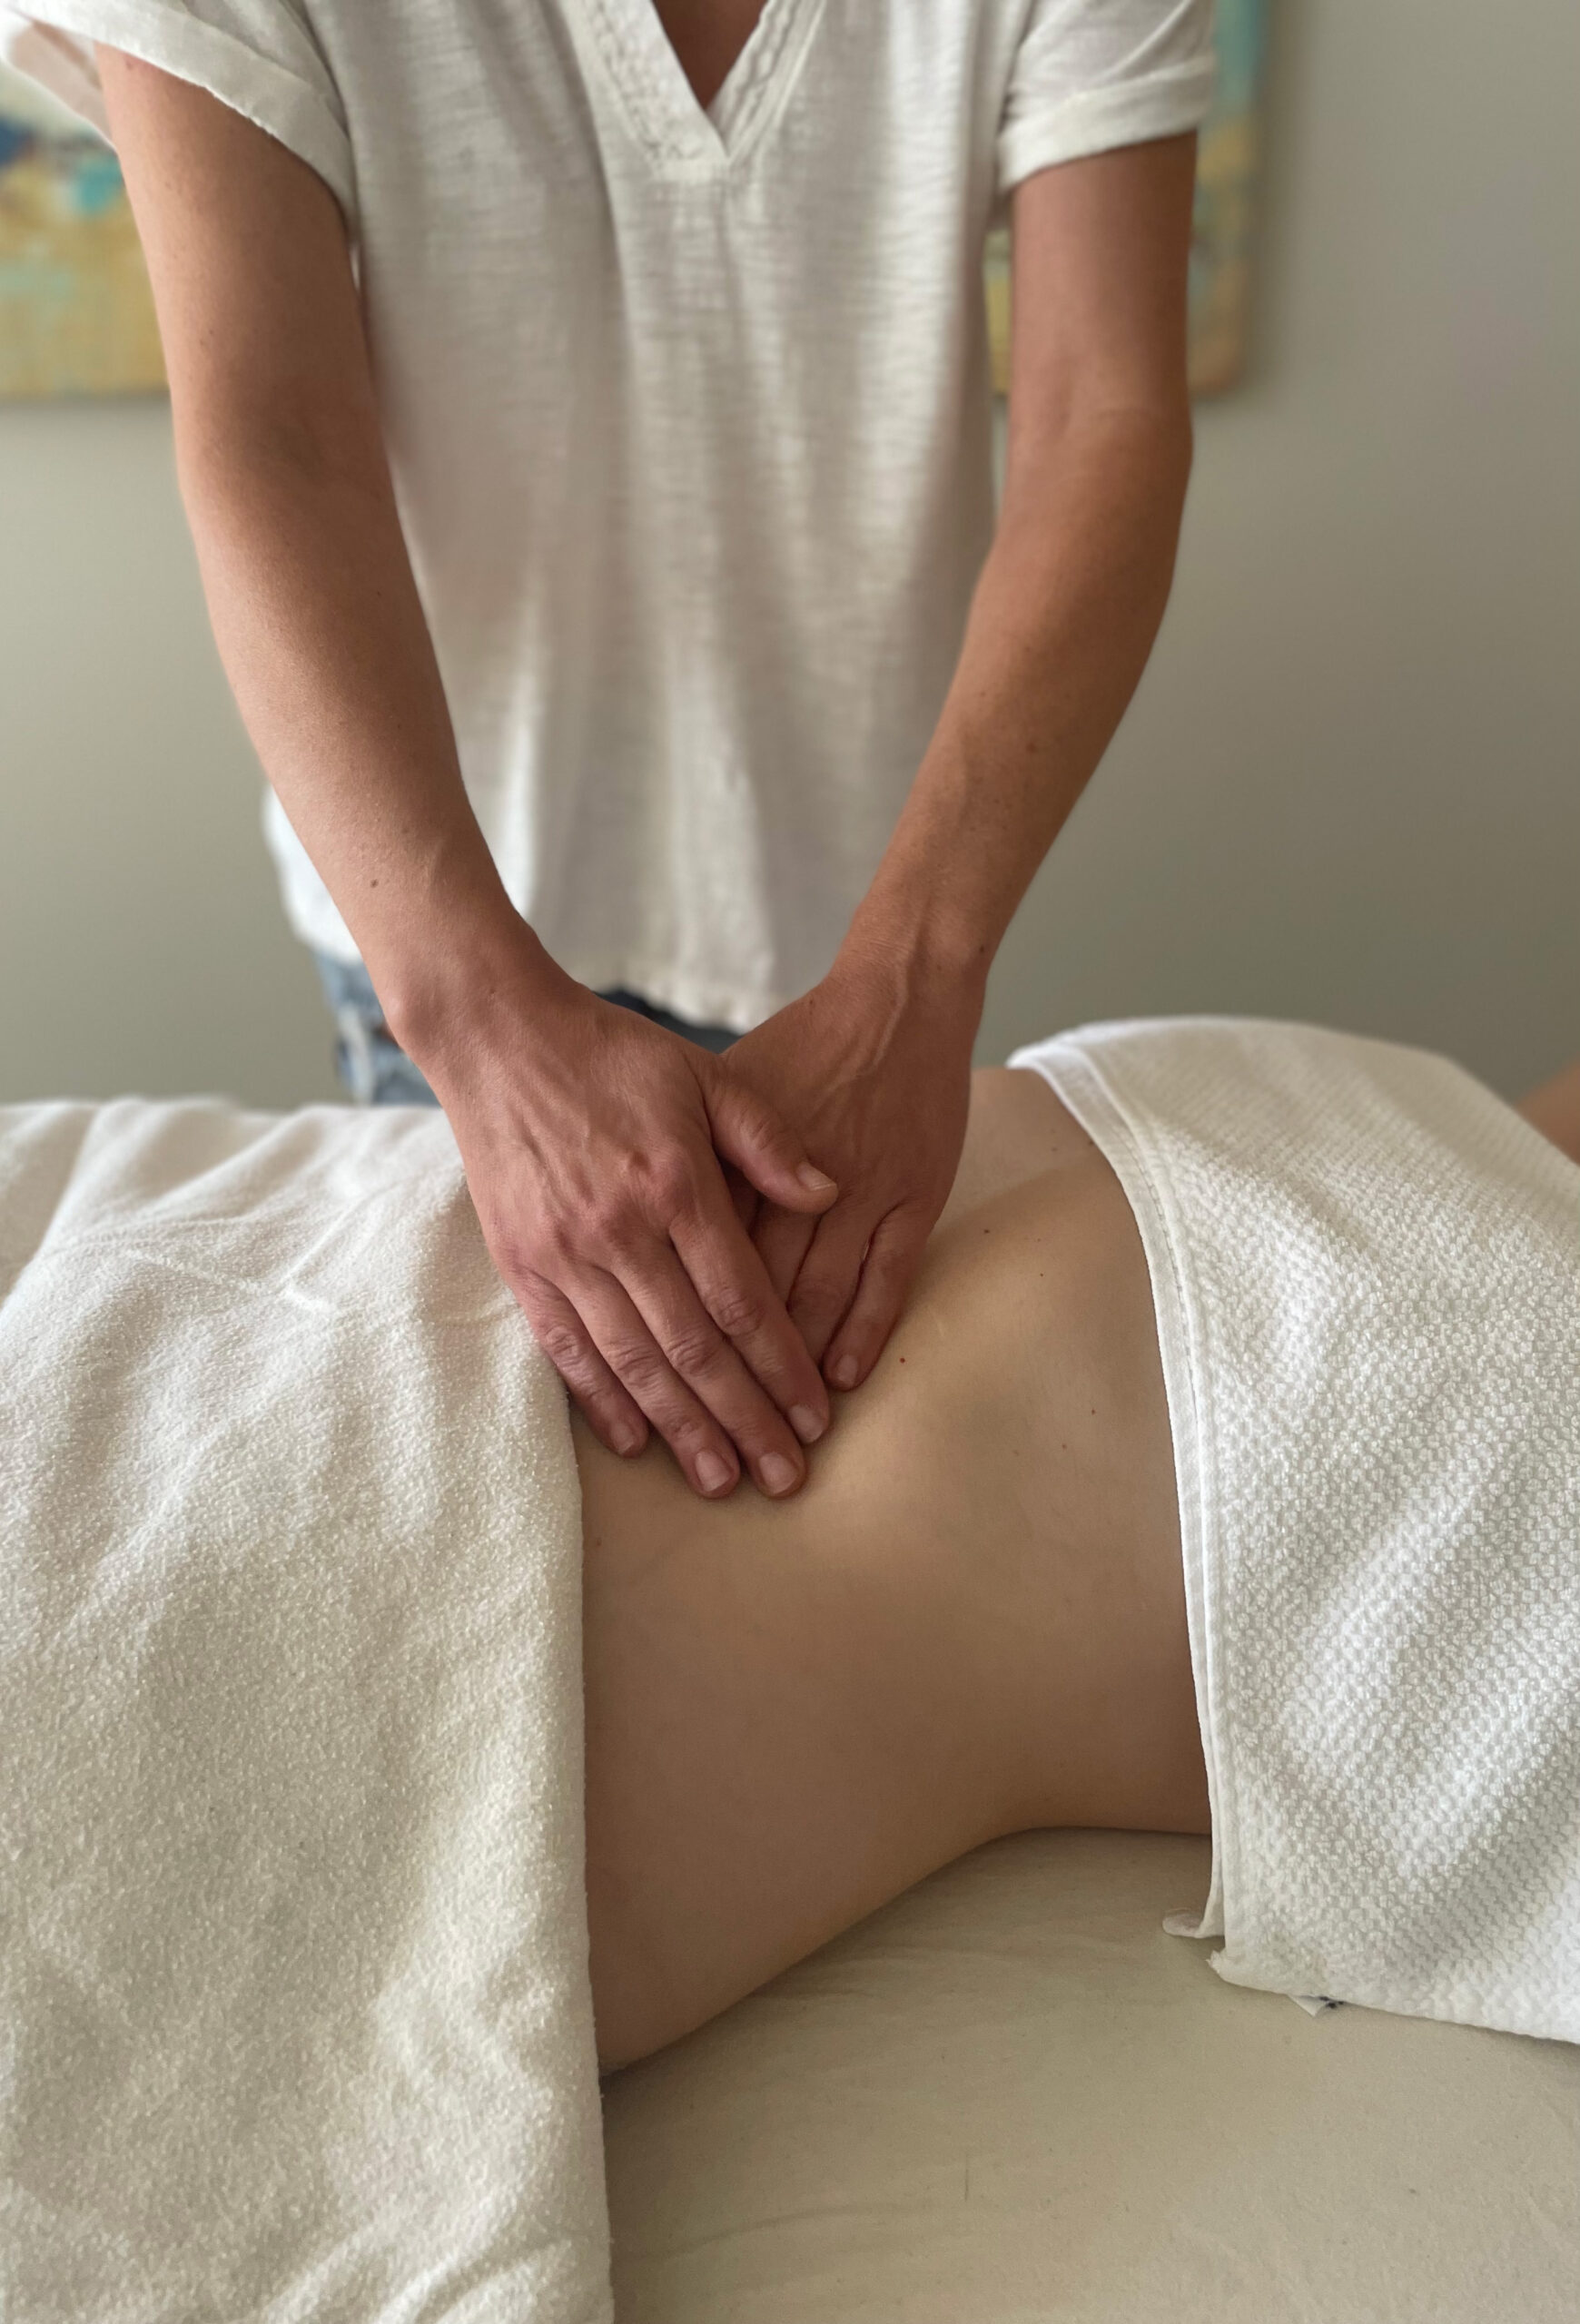 Post-surgical manual lymphatic drainage helps clear out excess lymph fluid caused by surgical trauma, which assists in faster healing and pain reduction.